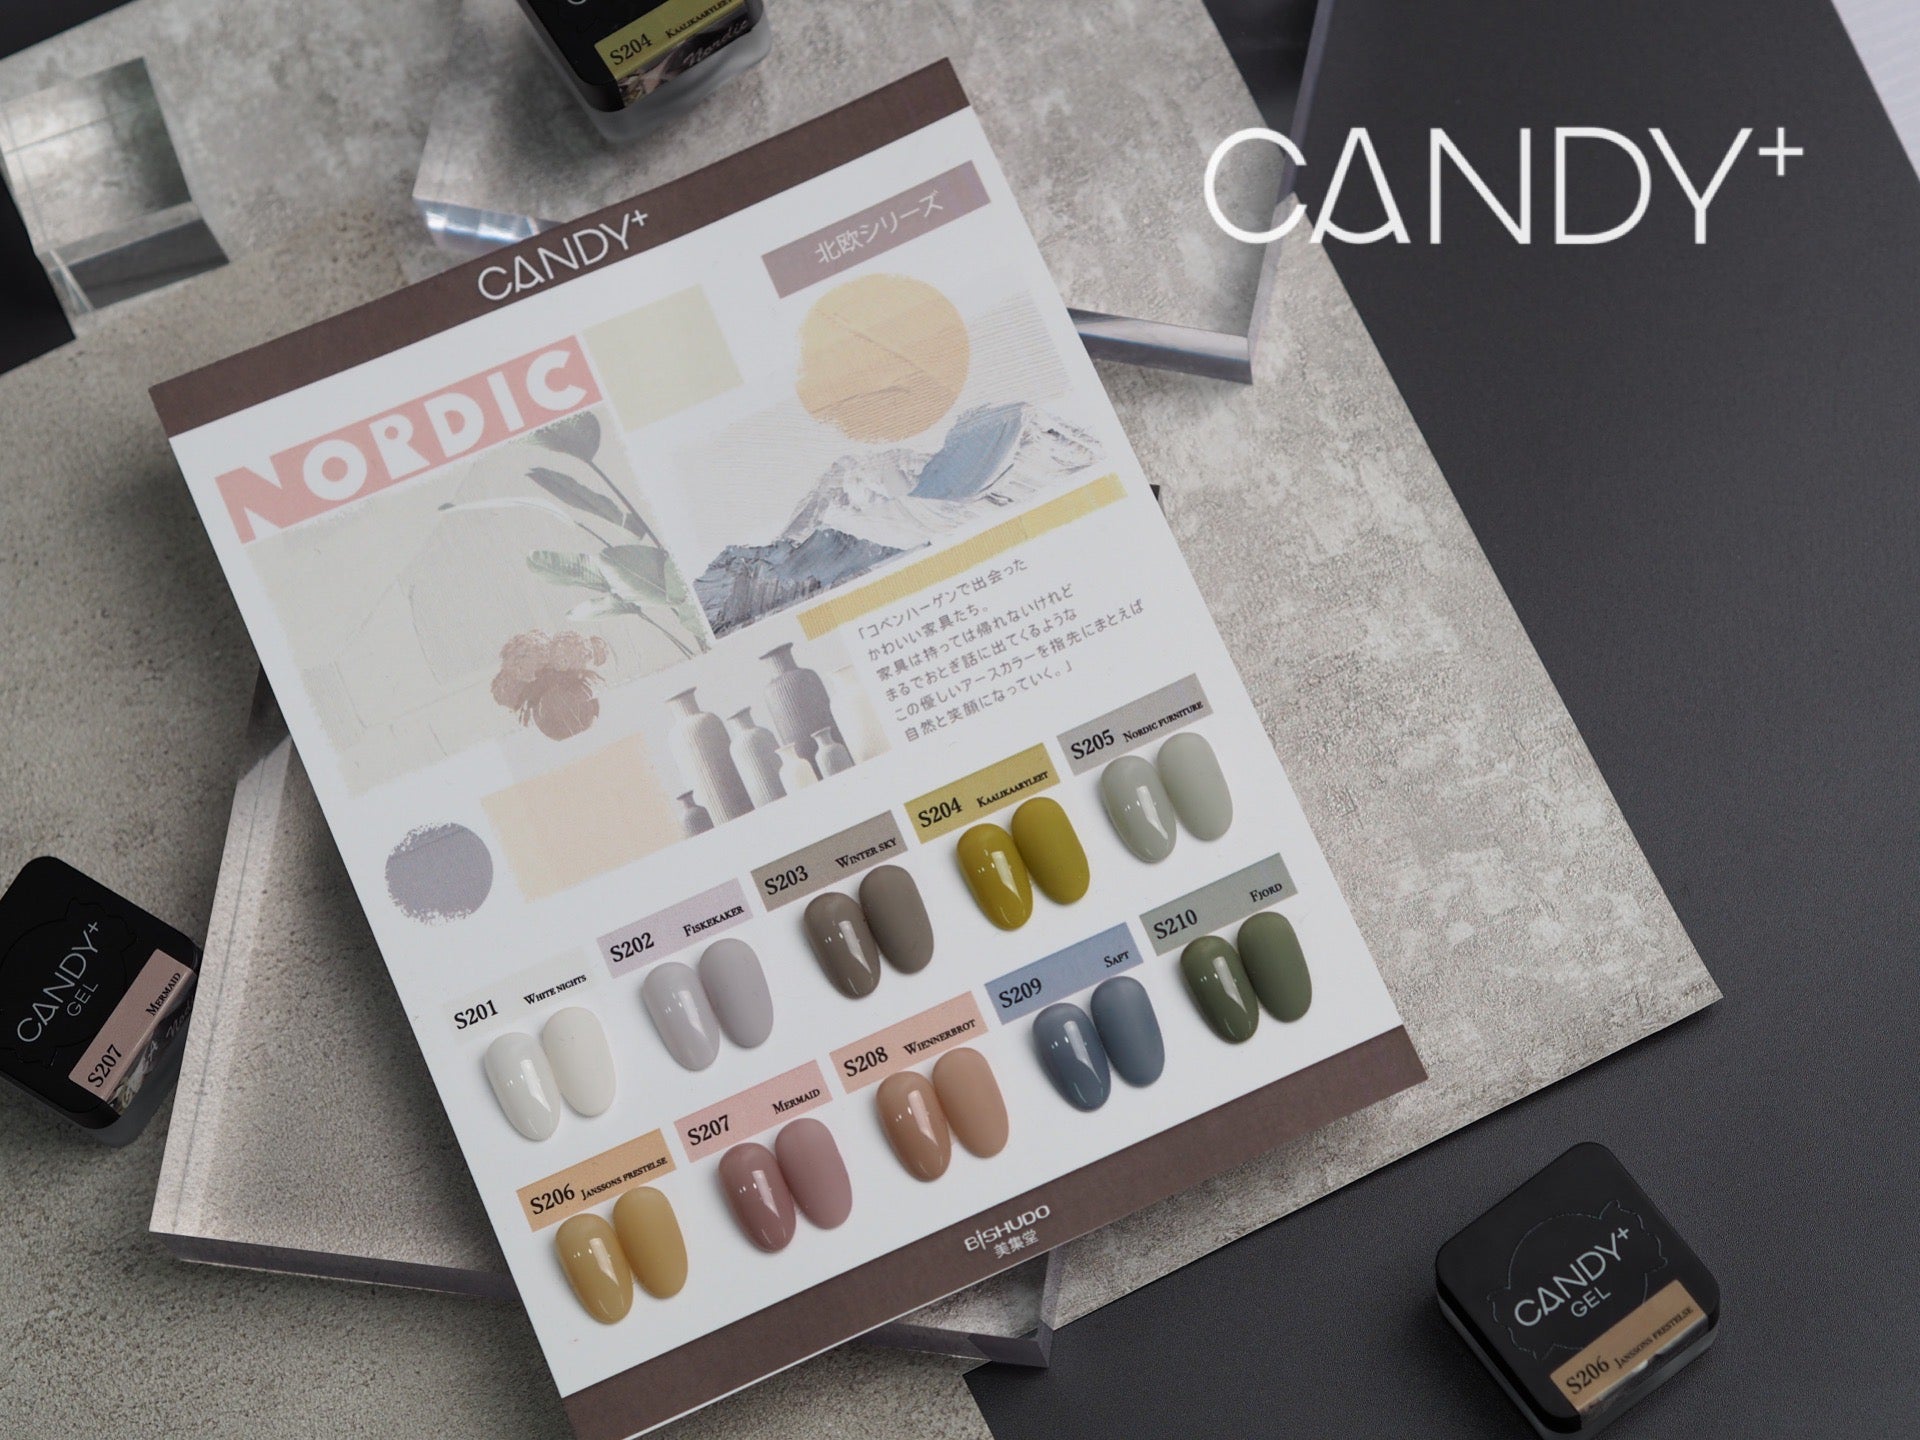 CANDY+ Nordic Series - 10 Colour Gel